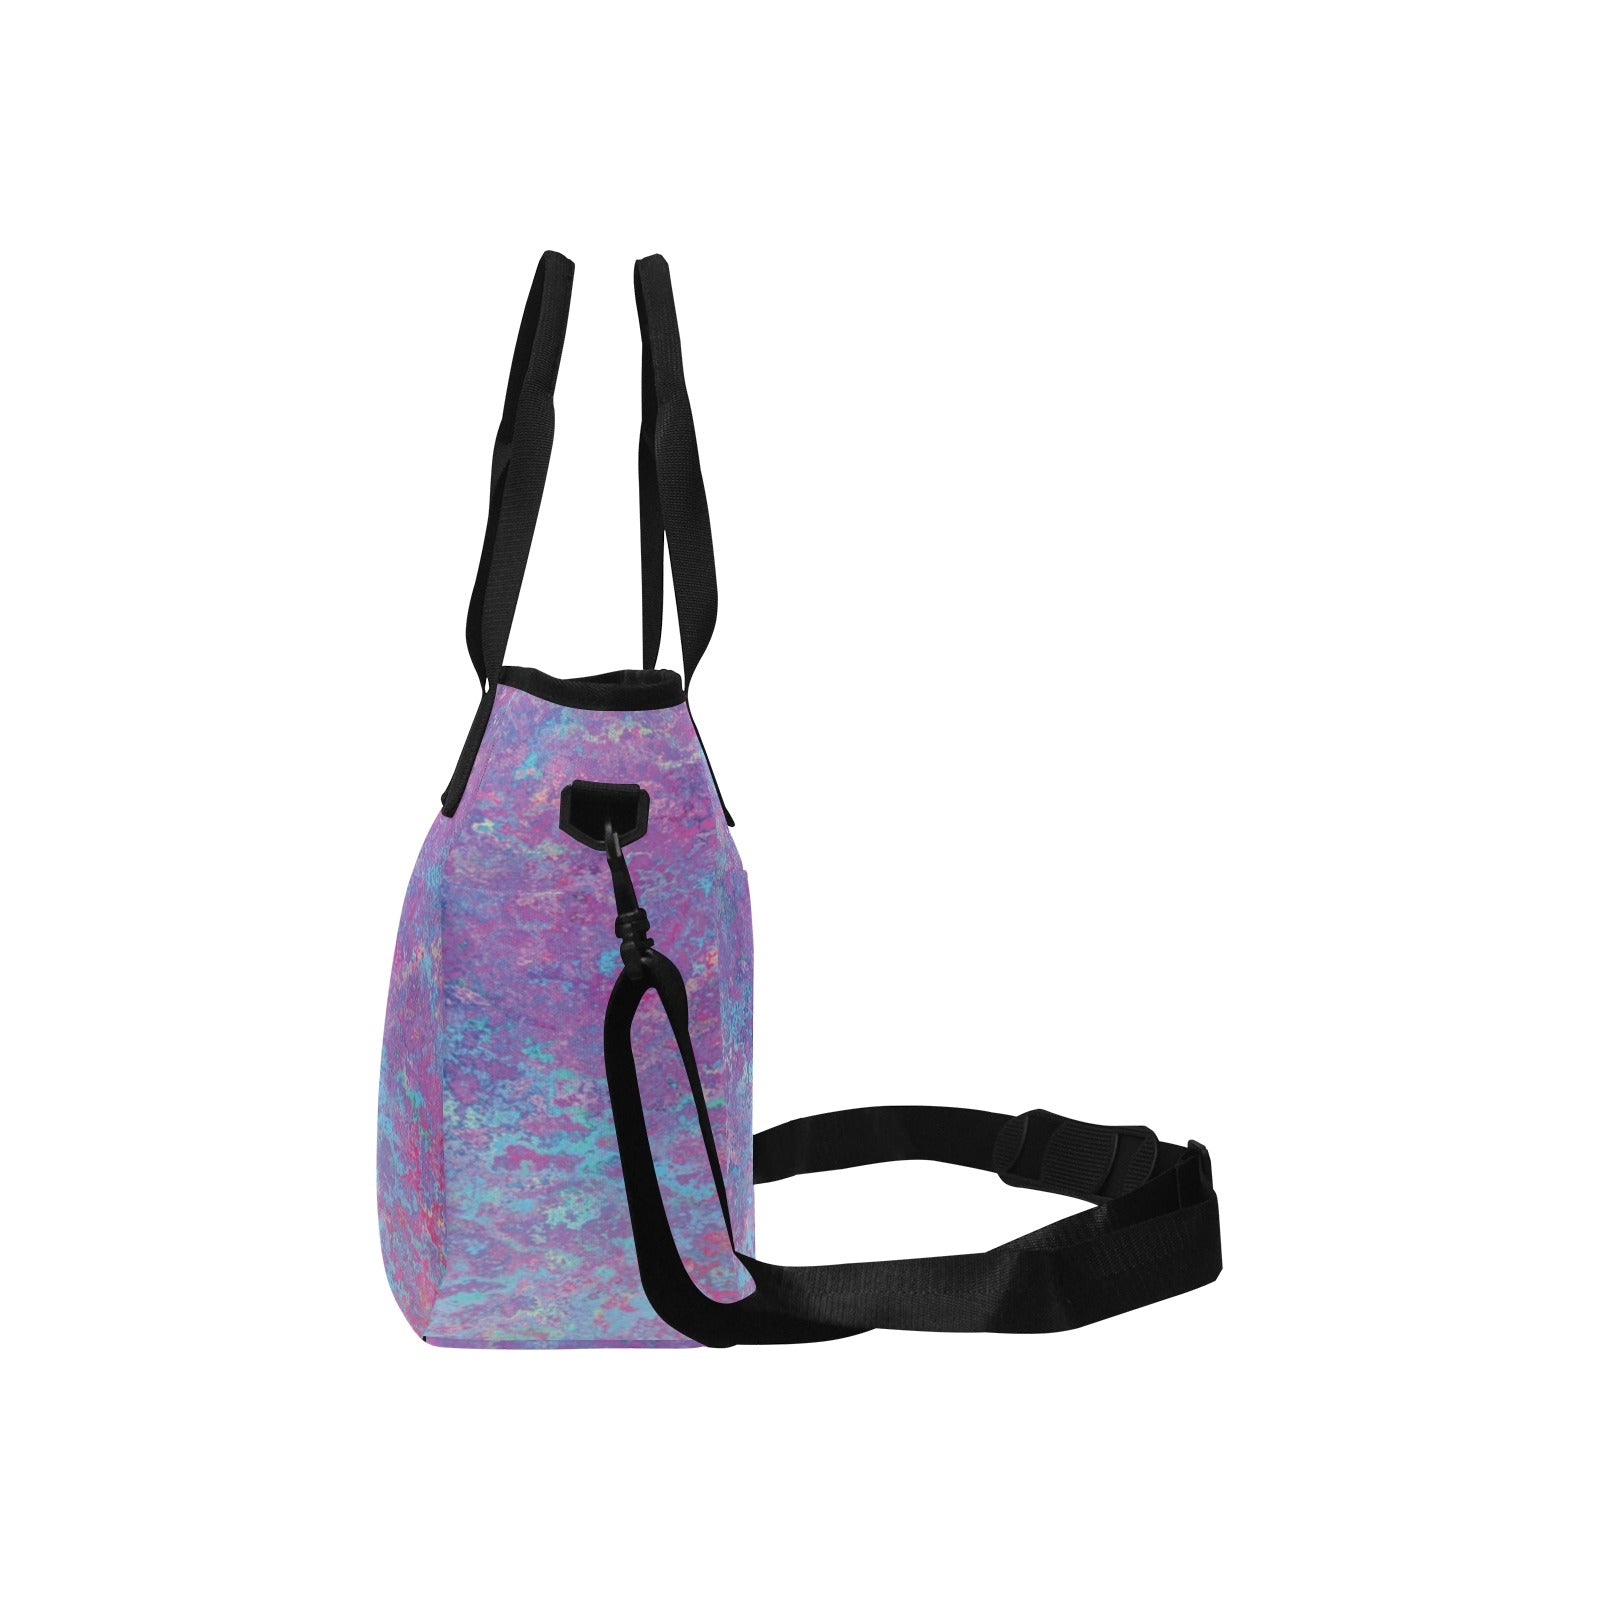 fz lunch bag - abstract 3 insulated lunch tote bag with shoulder strap (model1724)